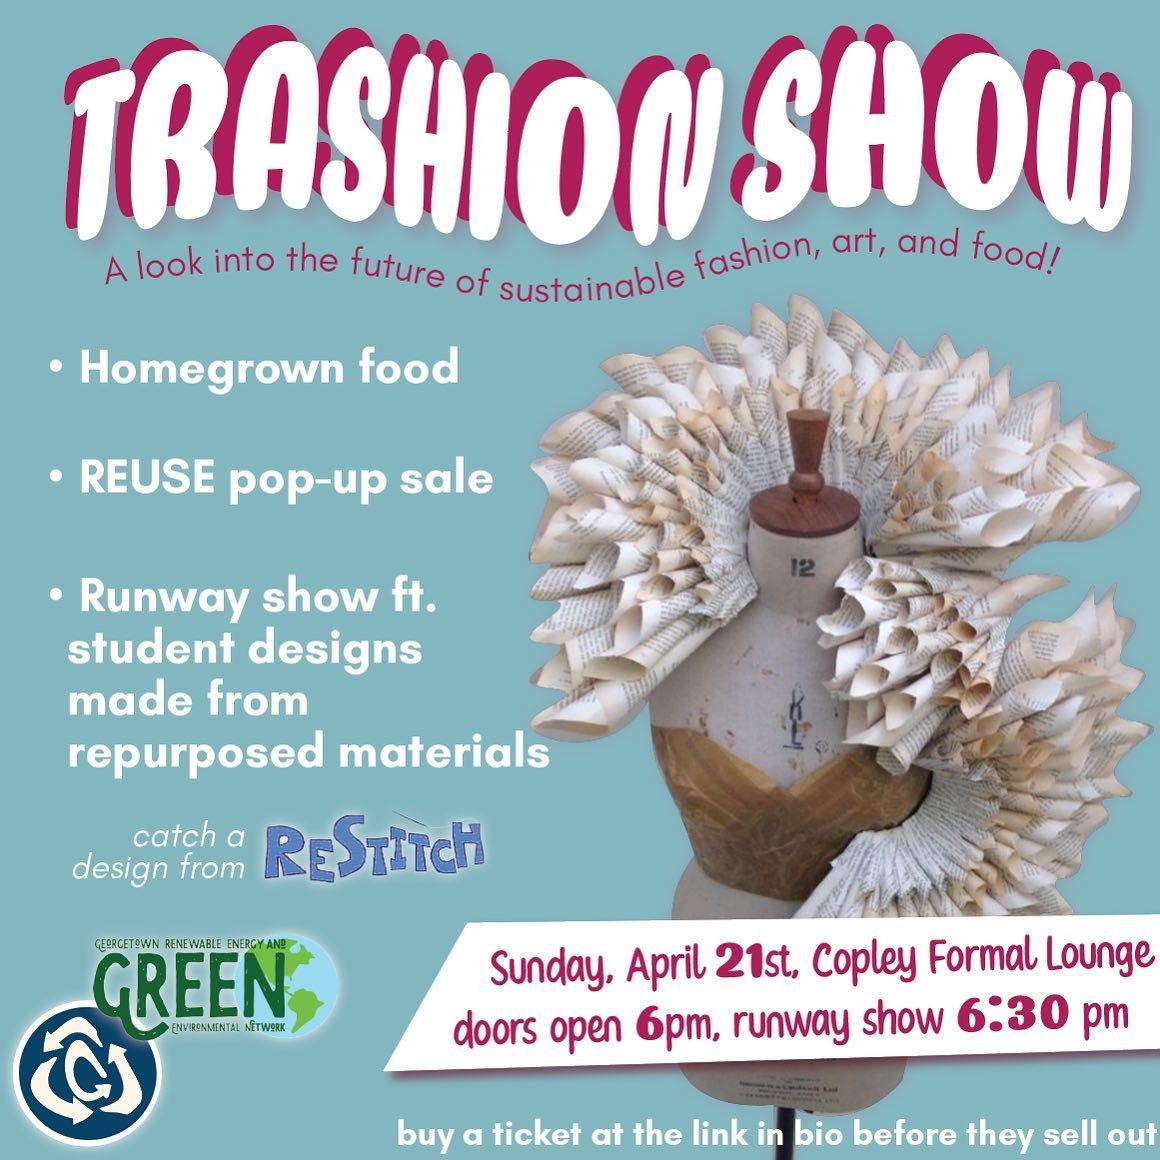 Start your earth week off right this Sunday at the GU Trashion Show this Sunday! The show merges art and sustainability by showcasing outfits created by students using entirely repurposed material and features designer Celia Led&oacute;n. All proceed